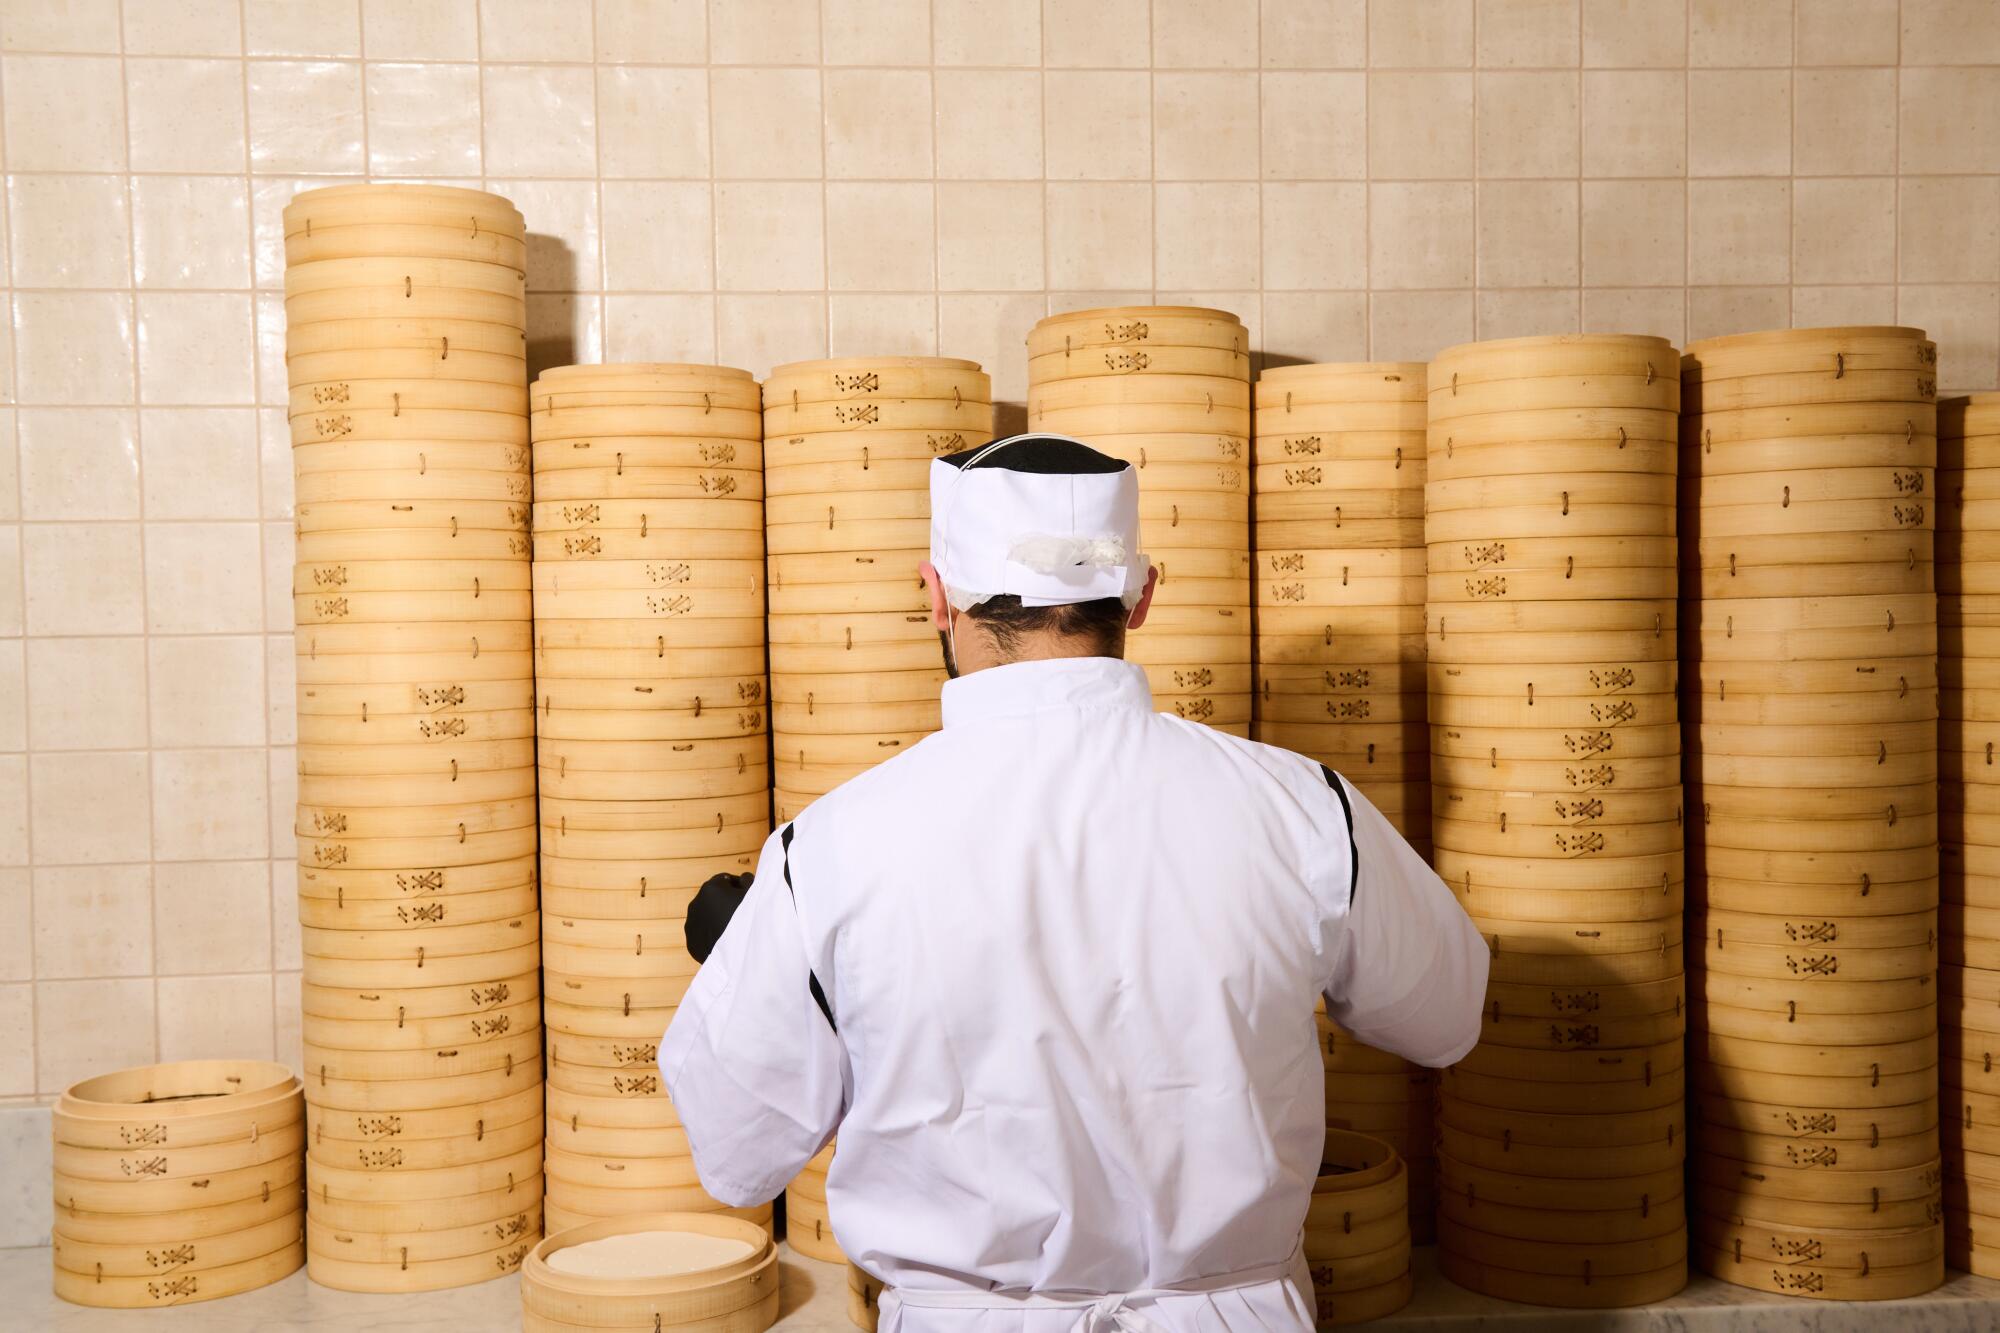 Basket steamers stacked at Din Tai Fung.